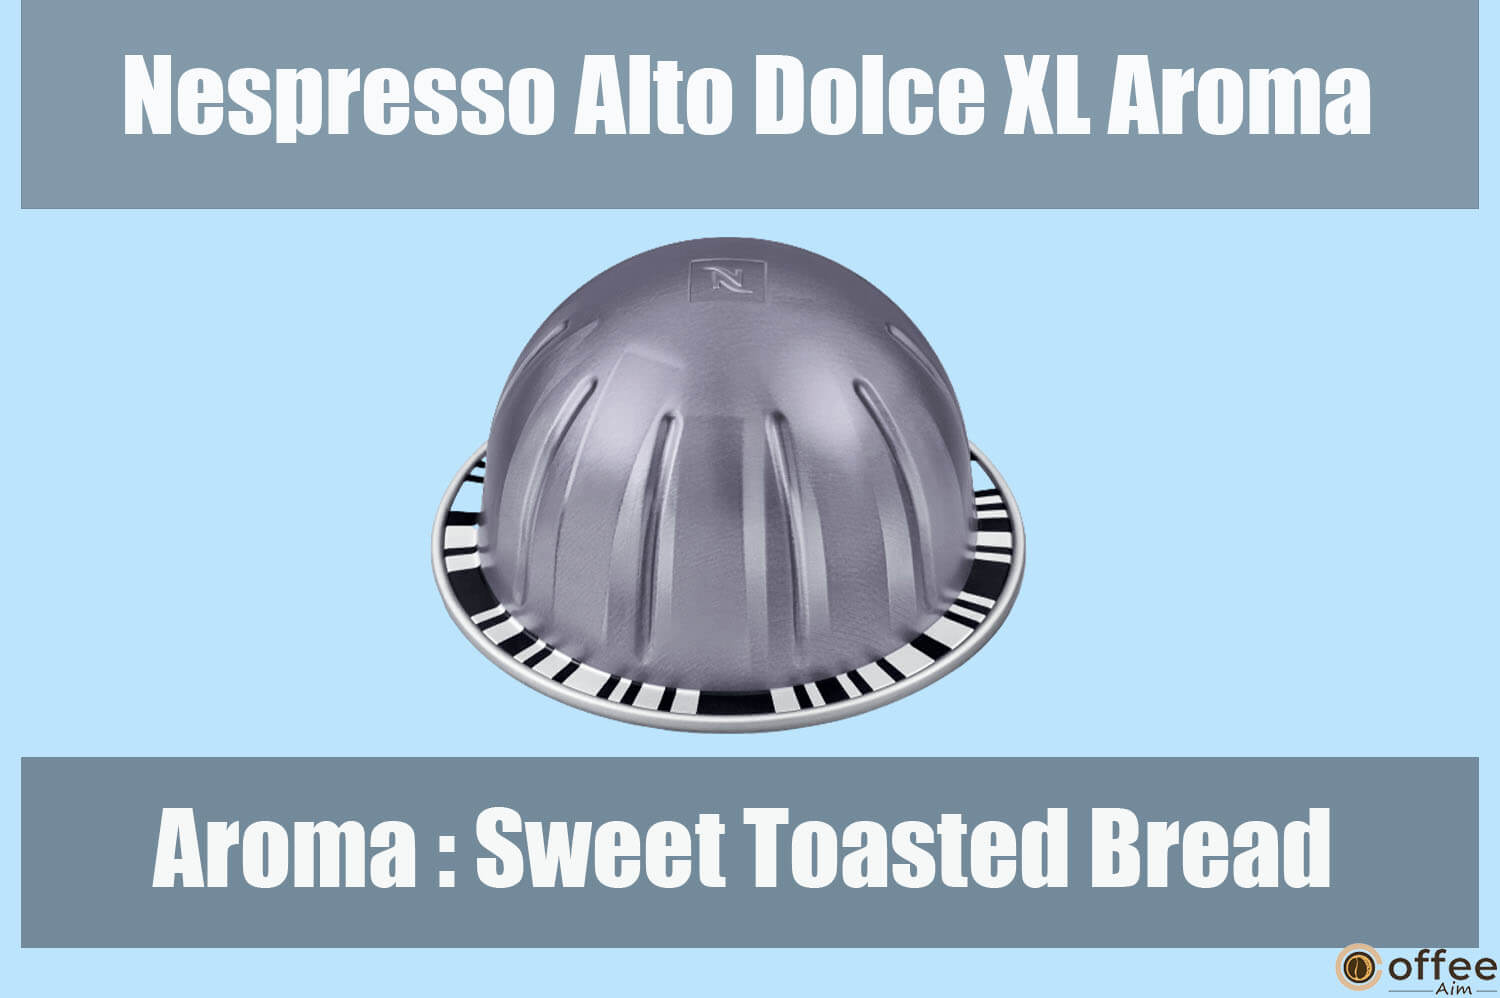 This image captures the aromatic essence of Nespresso Alto Dolce XL vertuo capsule, enhancing the Nespresso Alto Dolce XL review.